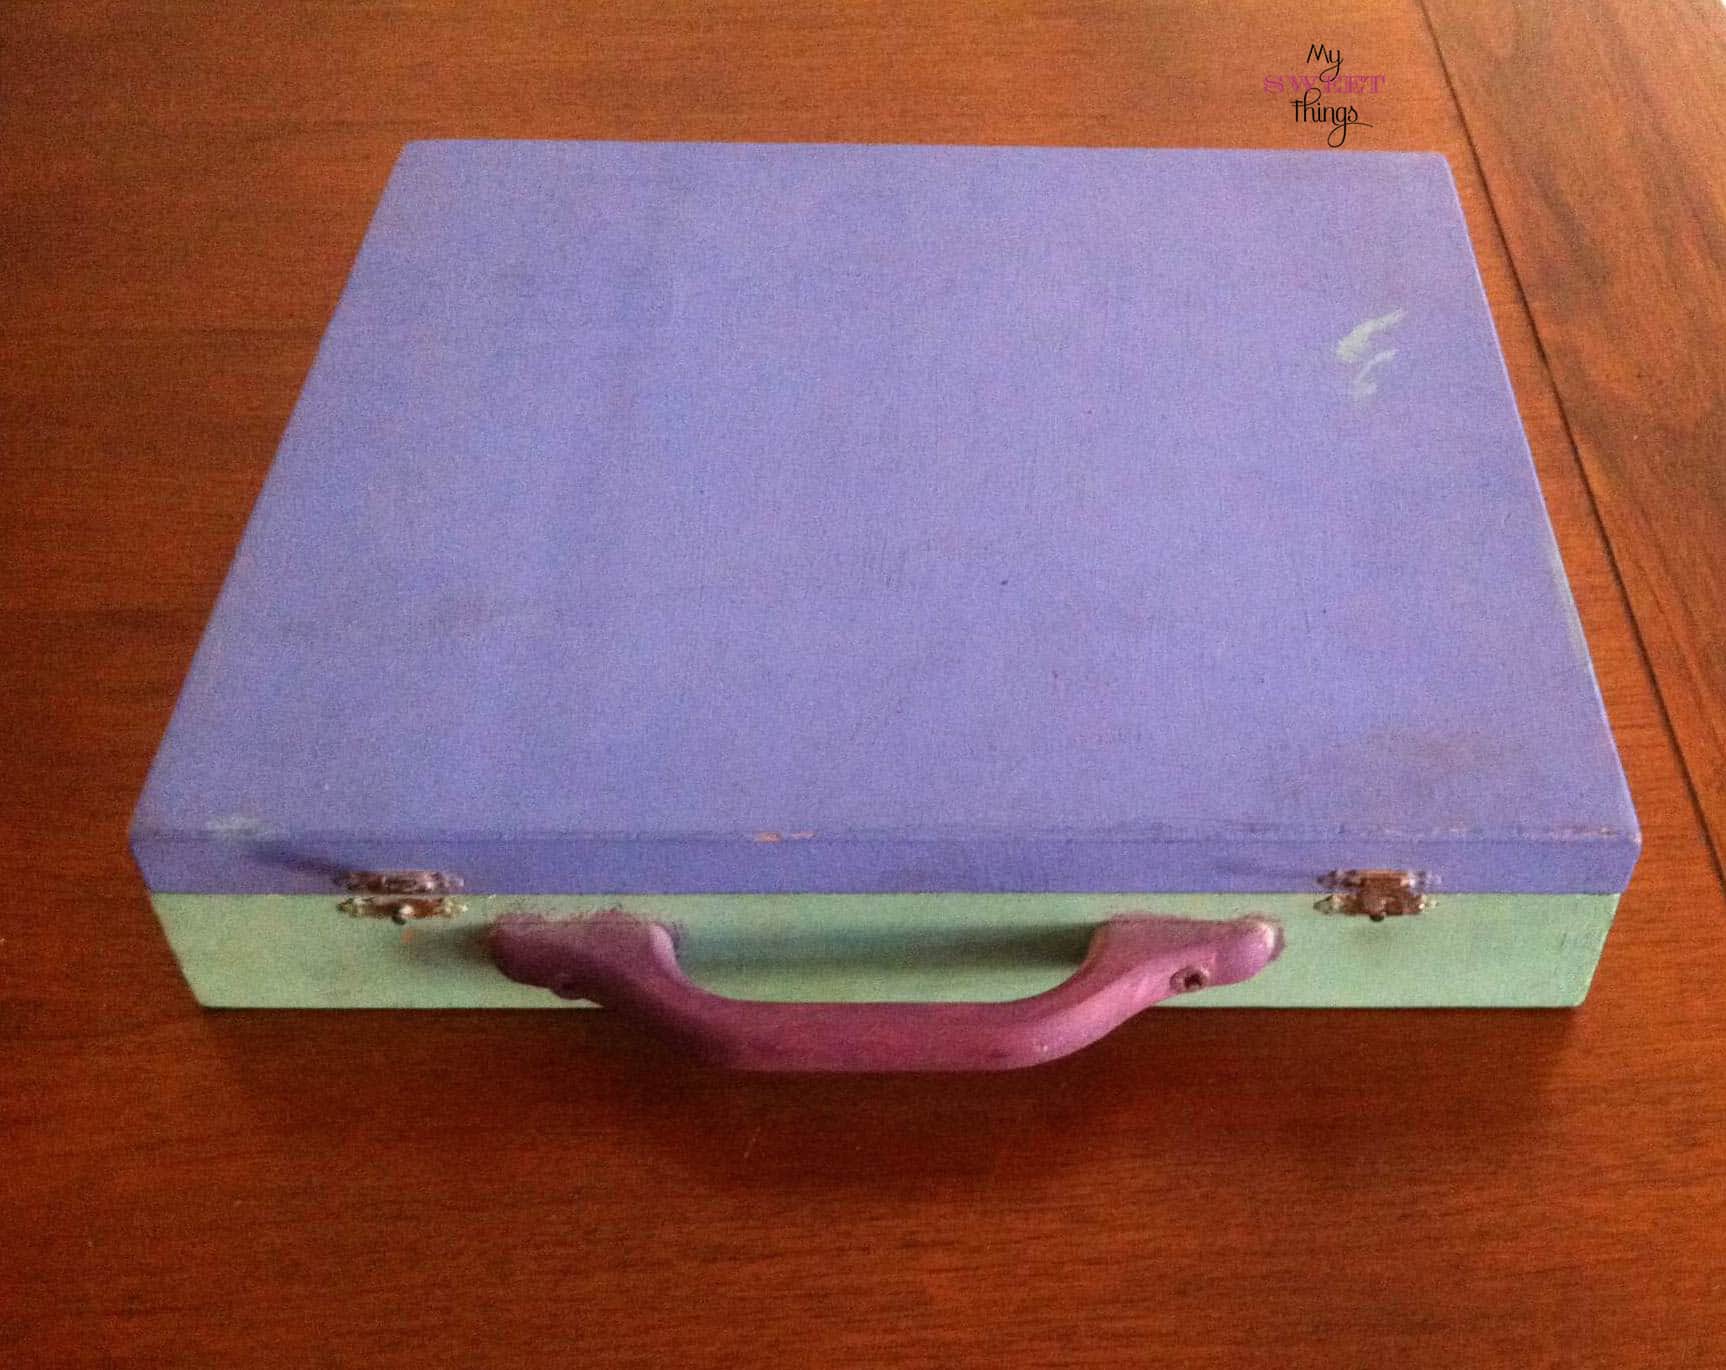 Frozen box and notepad